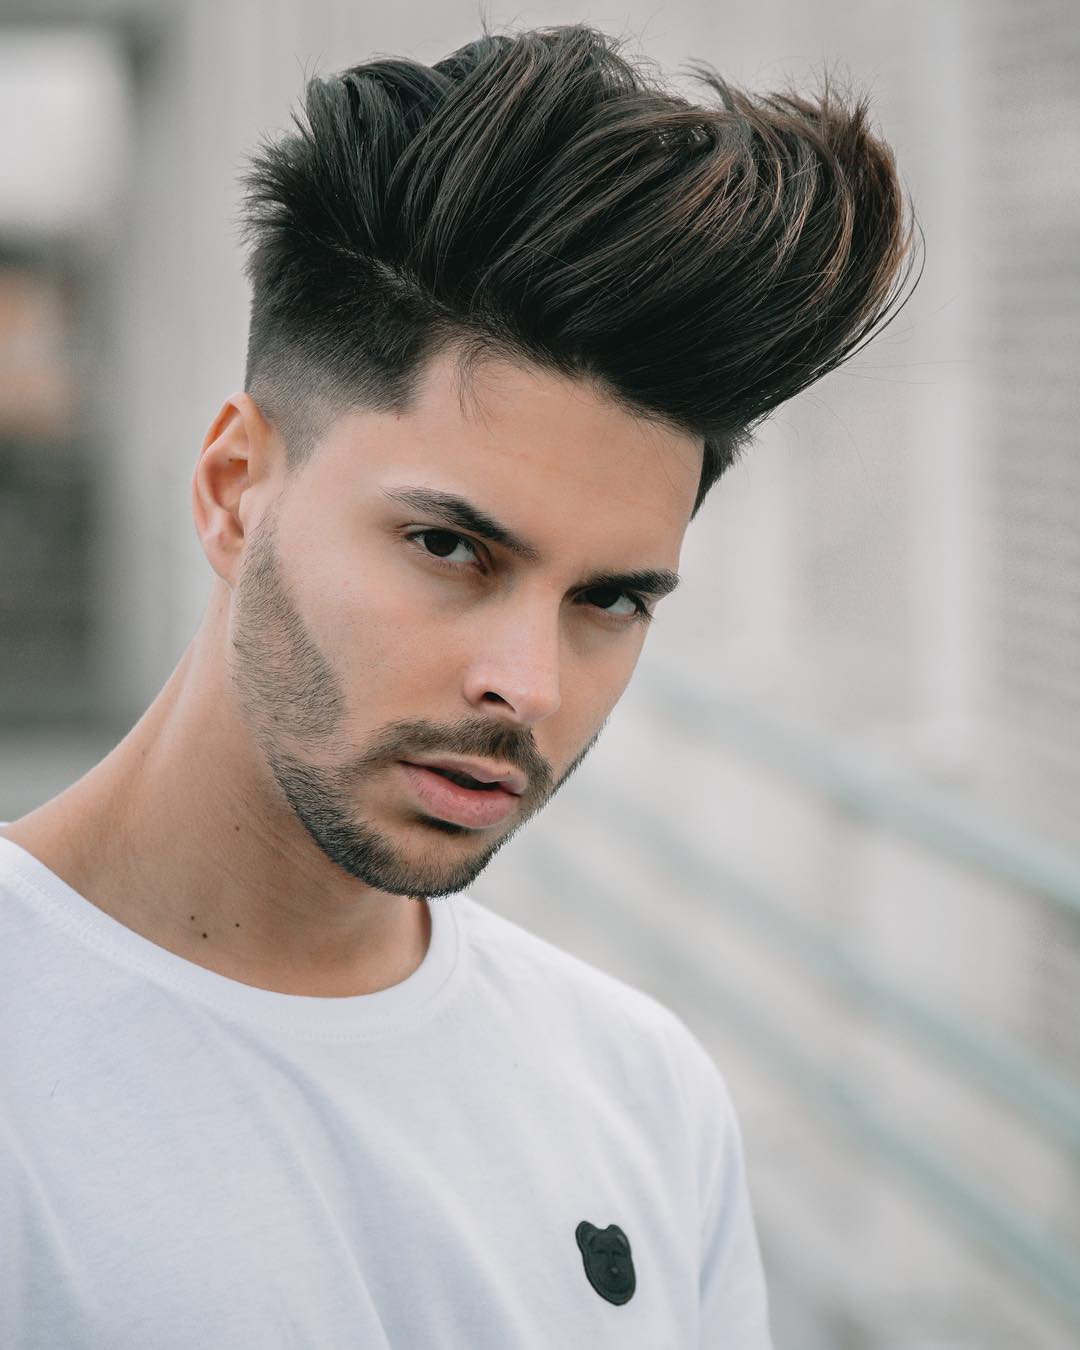 New Hairstyles For Boys
 Men s Haircut Trends 2019 Latest Hairstyles for Men s